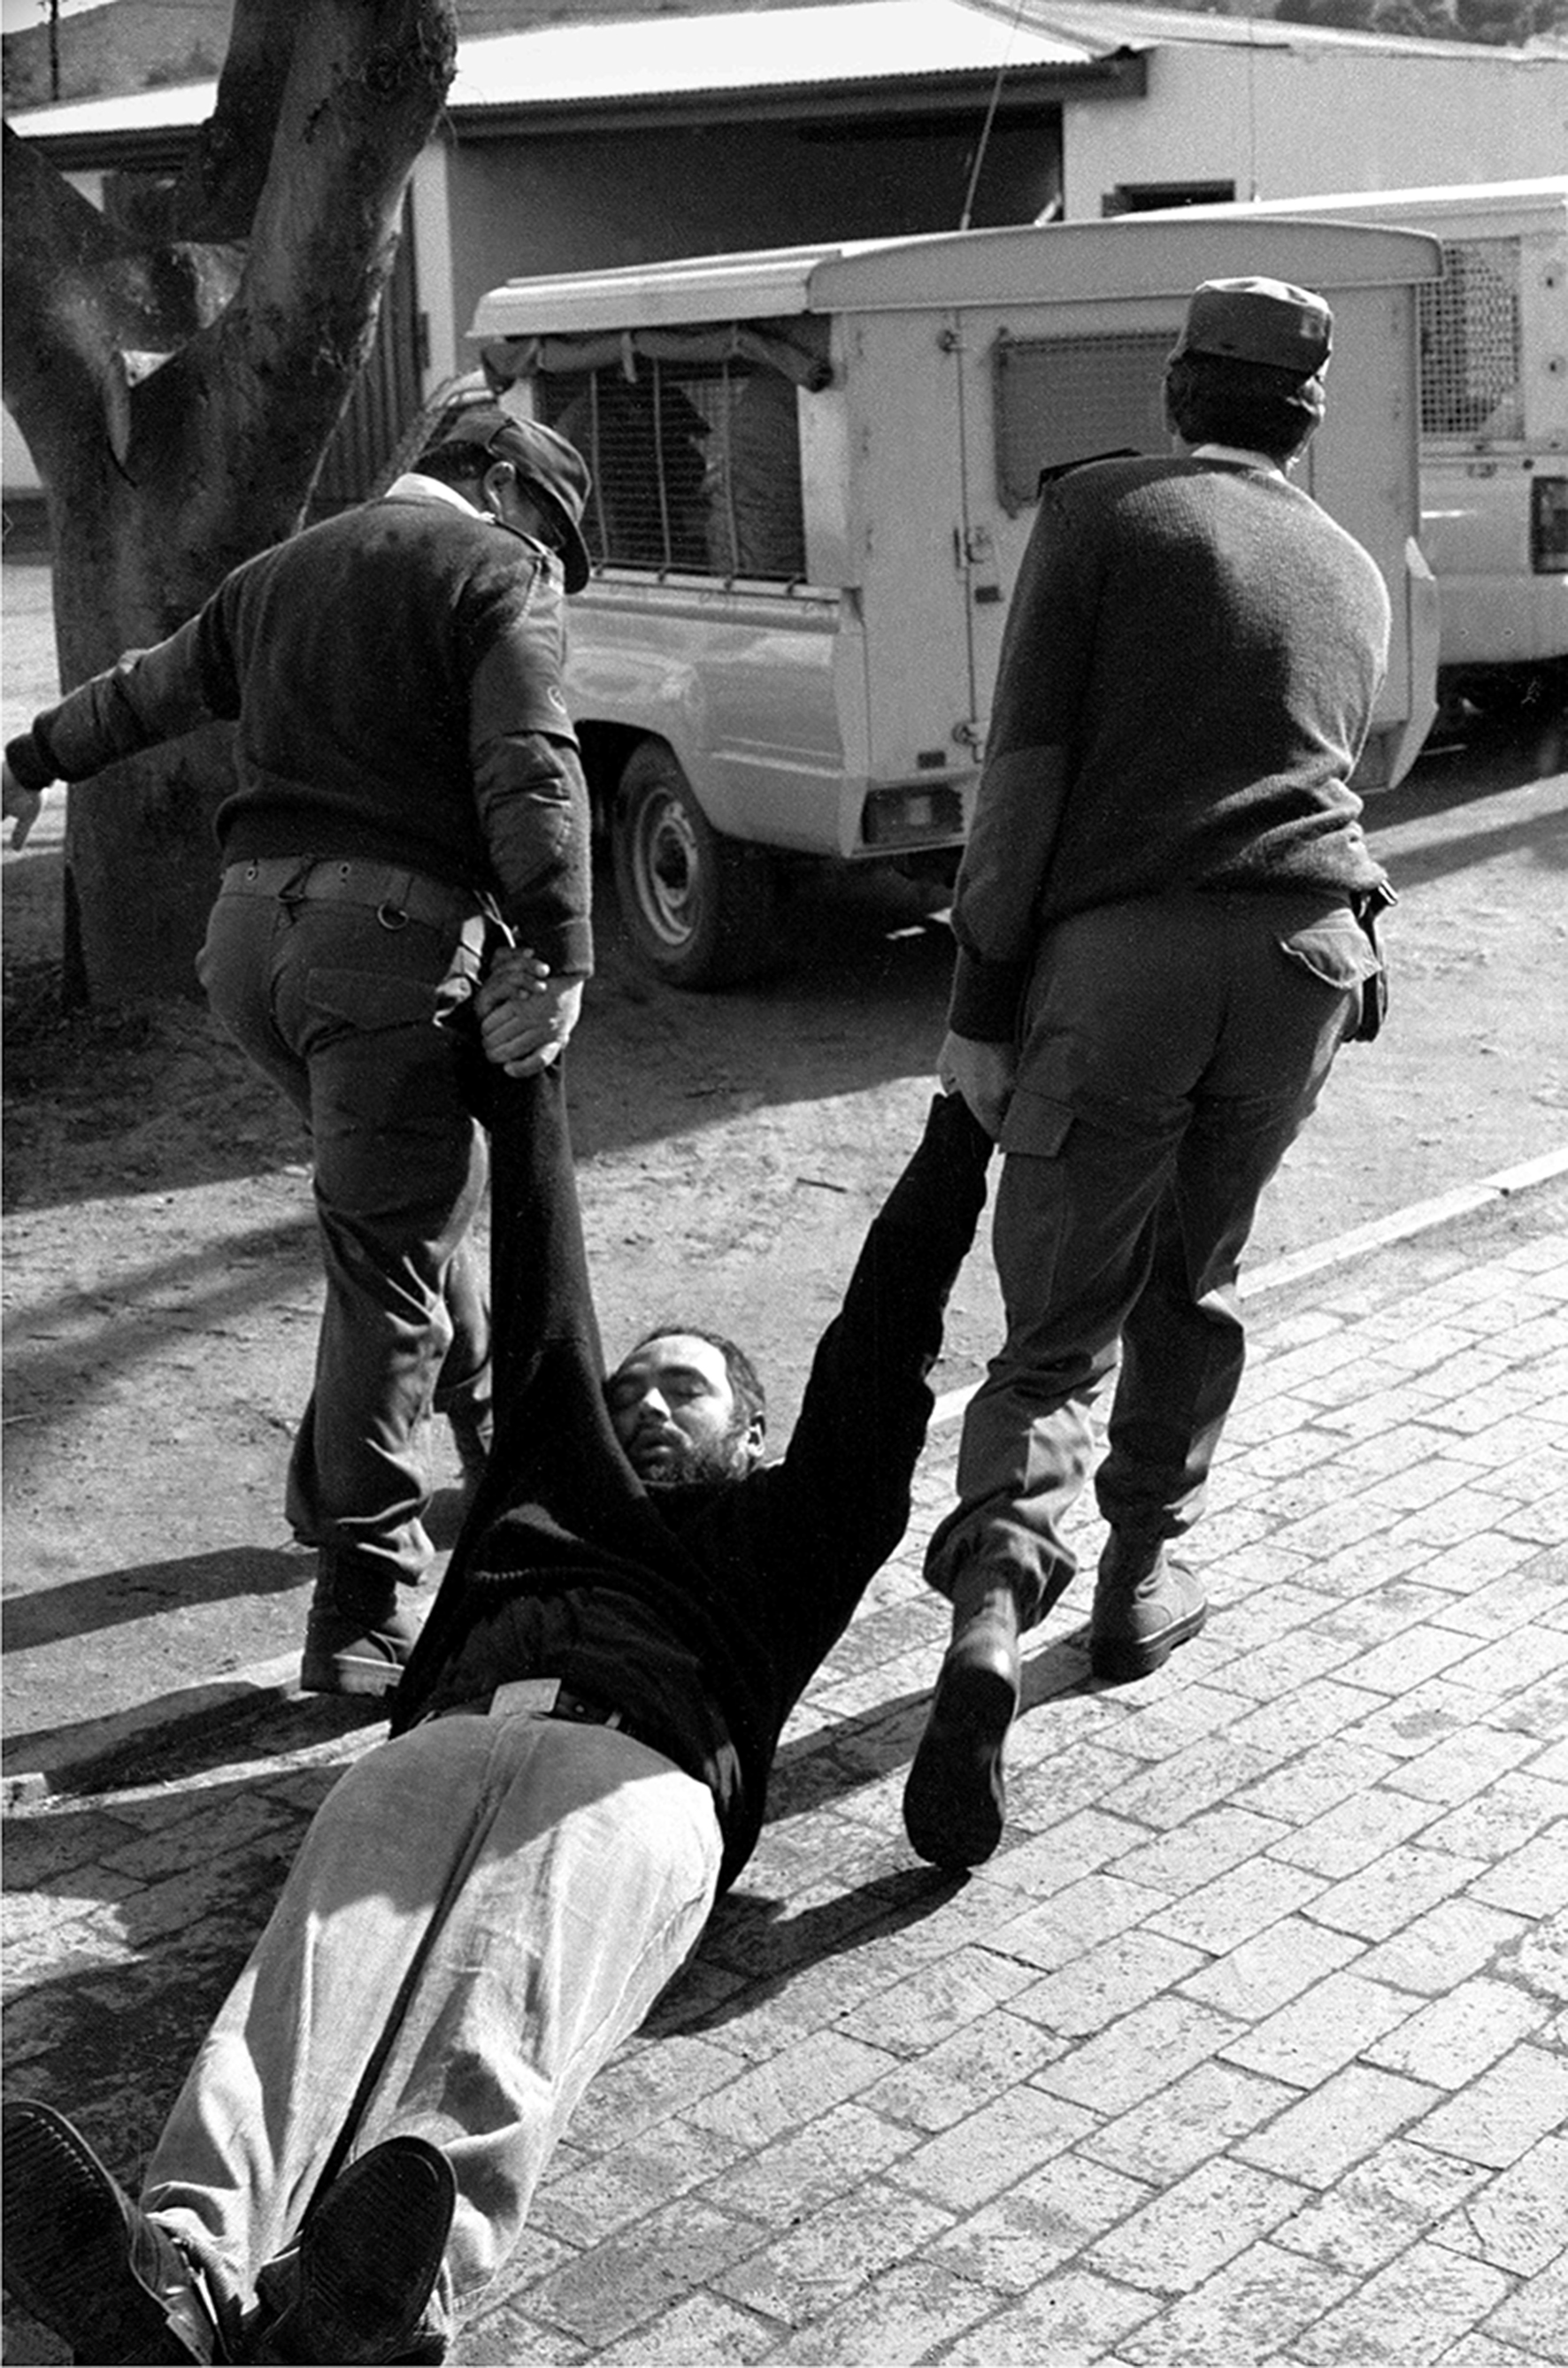 Rev. Michael Weeder being dragged after a teargas attack, June 1990